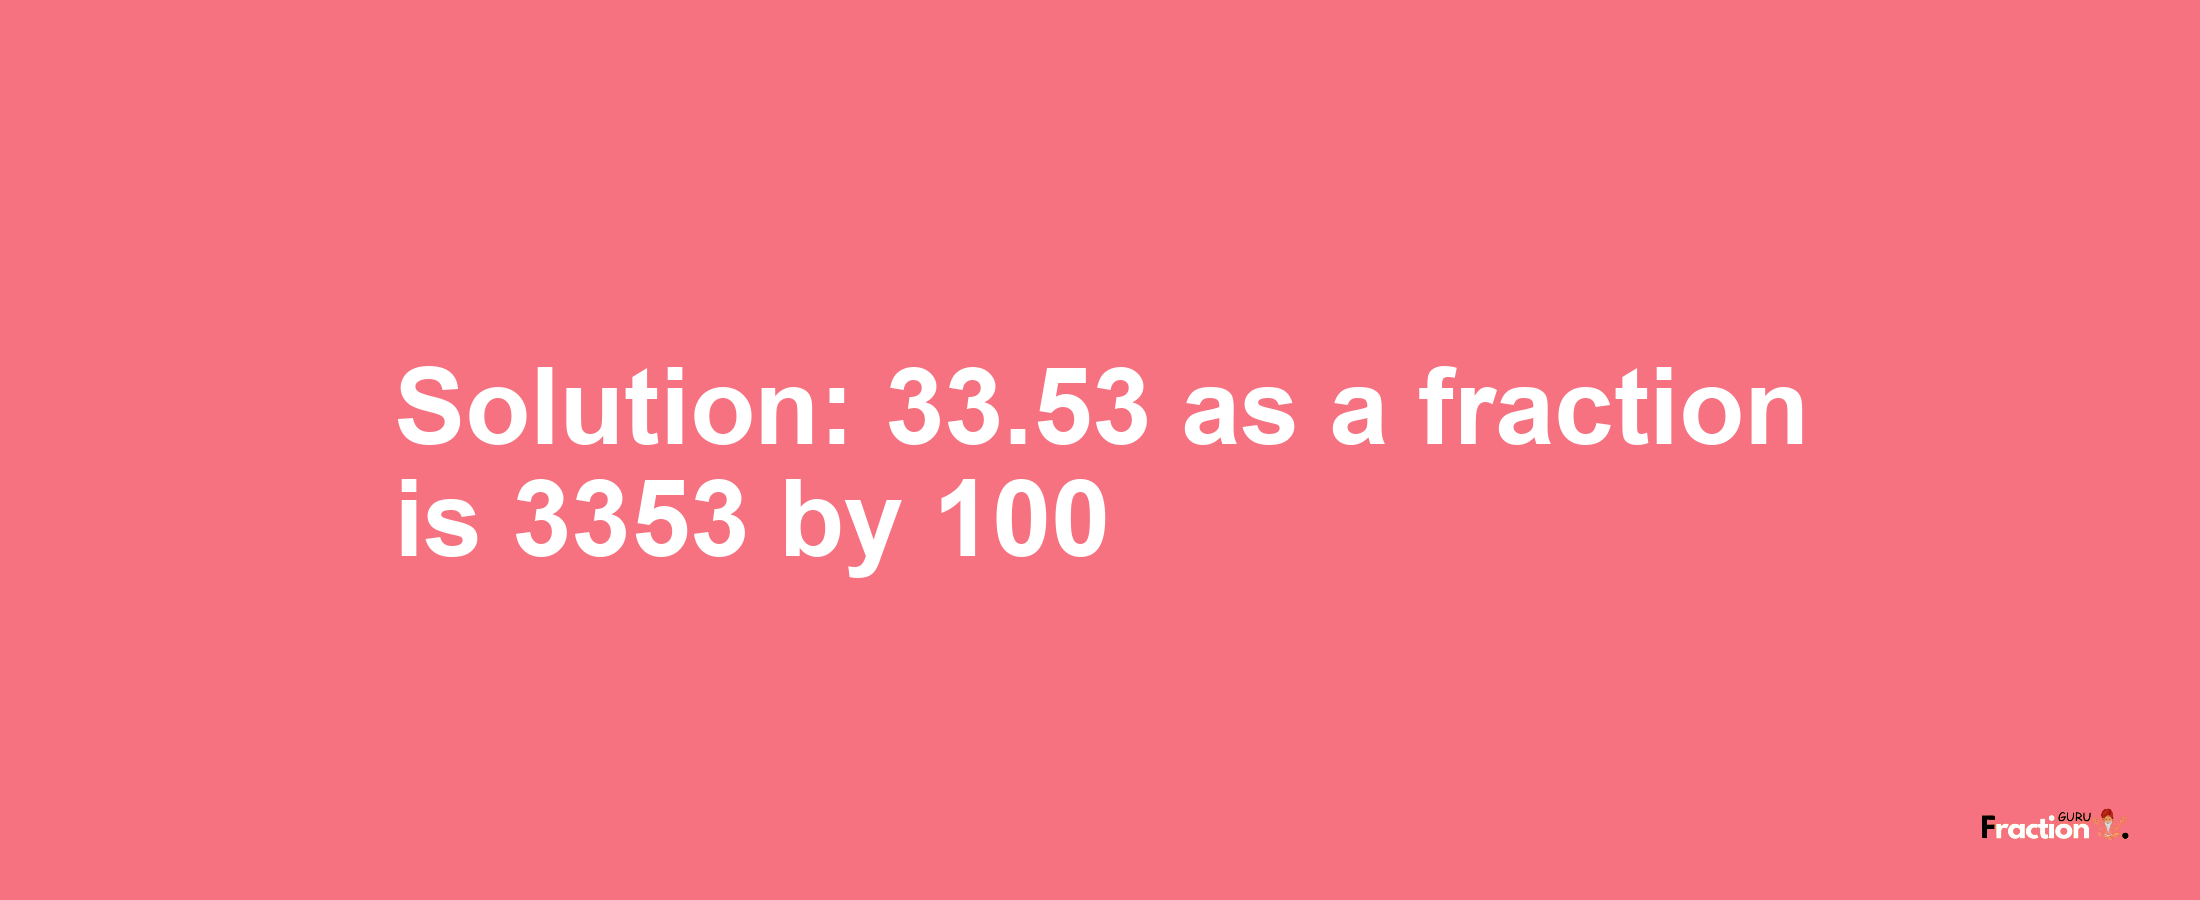 Solution:33.53 as a fraction is 3353/100